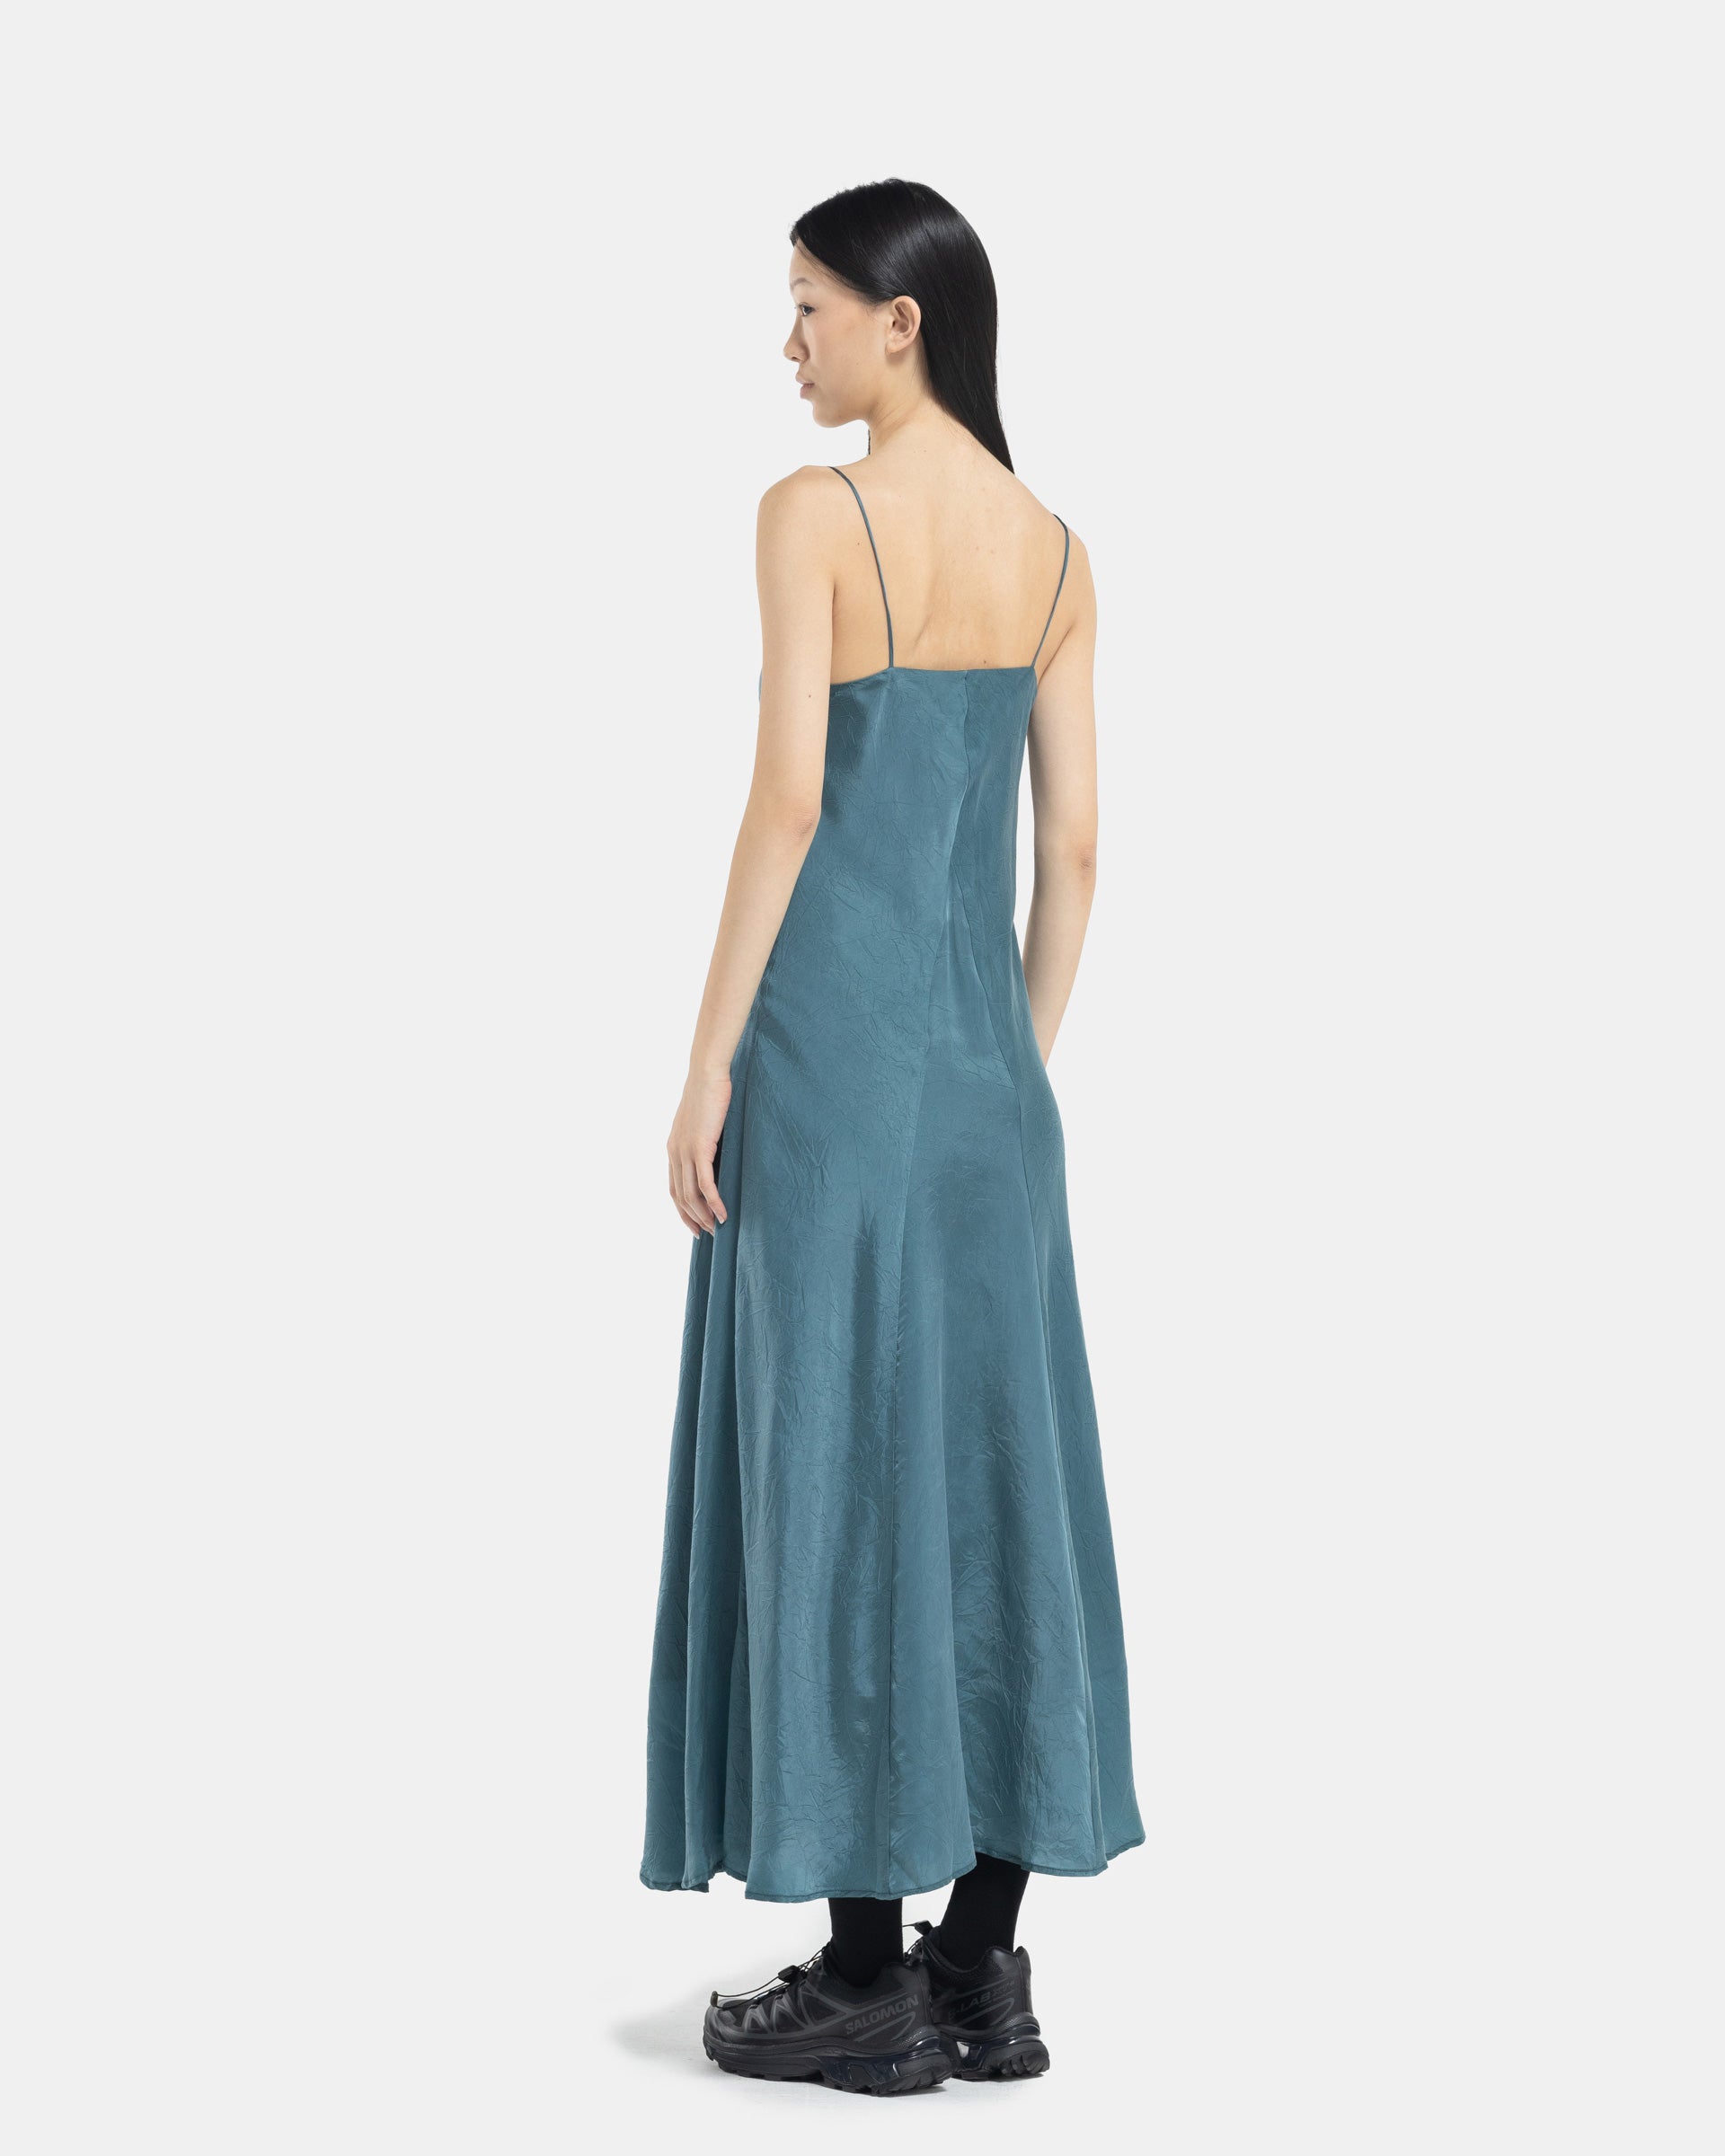 Model wearing blue bias slip dress from Song For The Mute on white background